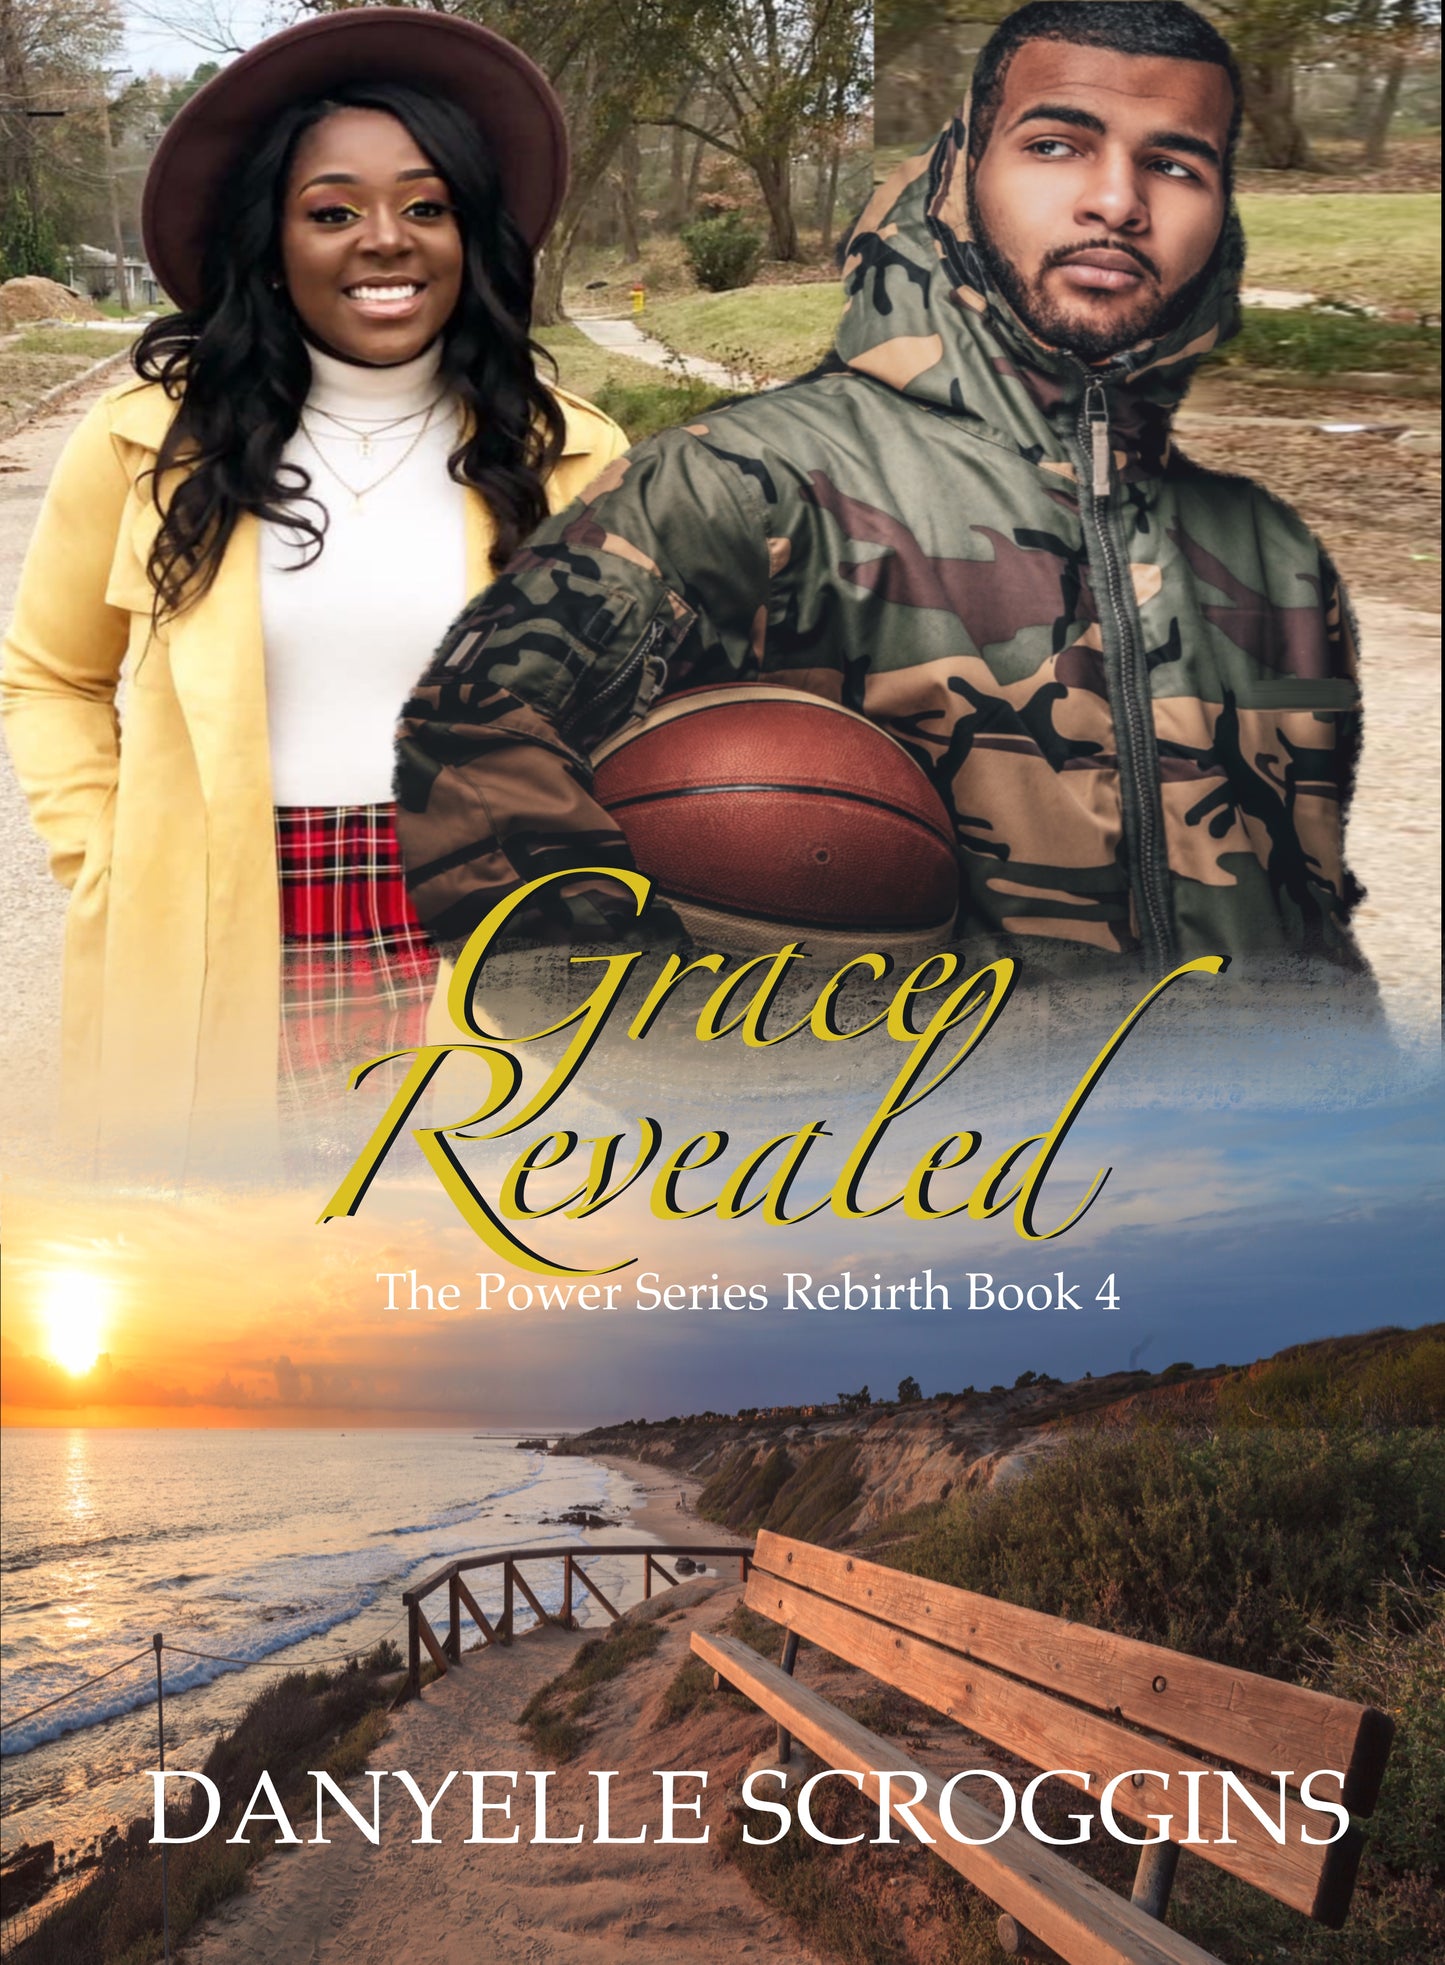 Grace Revealed (The Power Series Rebirth Book 4)